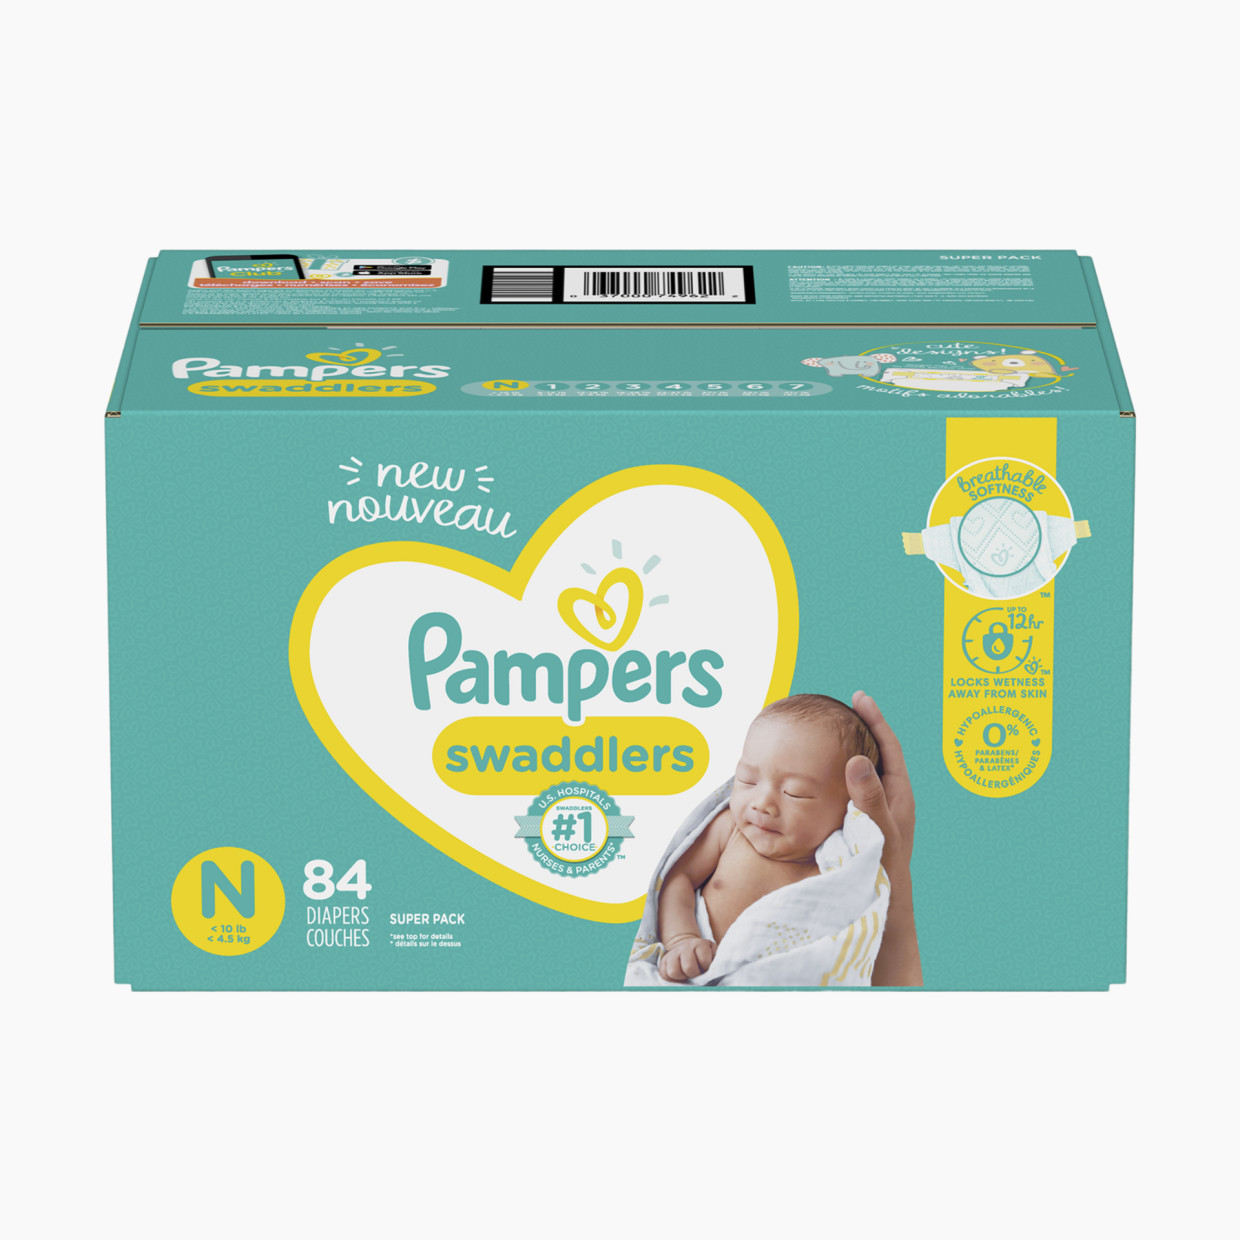 Pampers Swaddlers Disposable Diapers - Newborn, 84 Count.